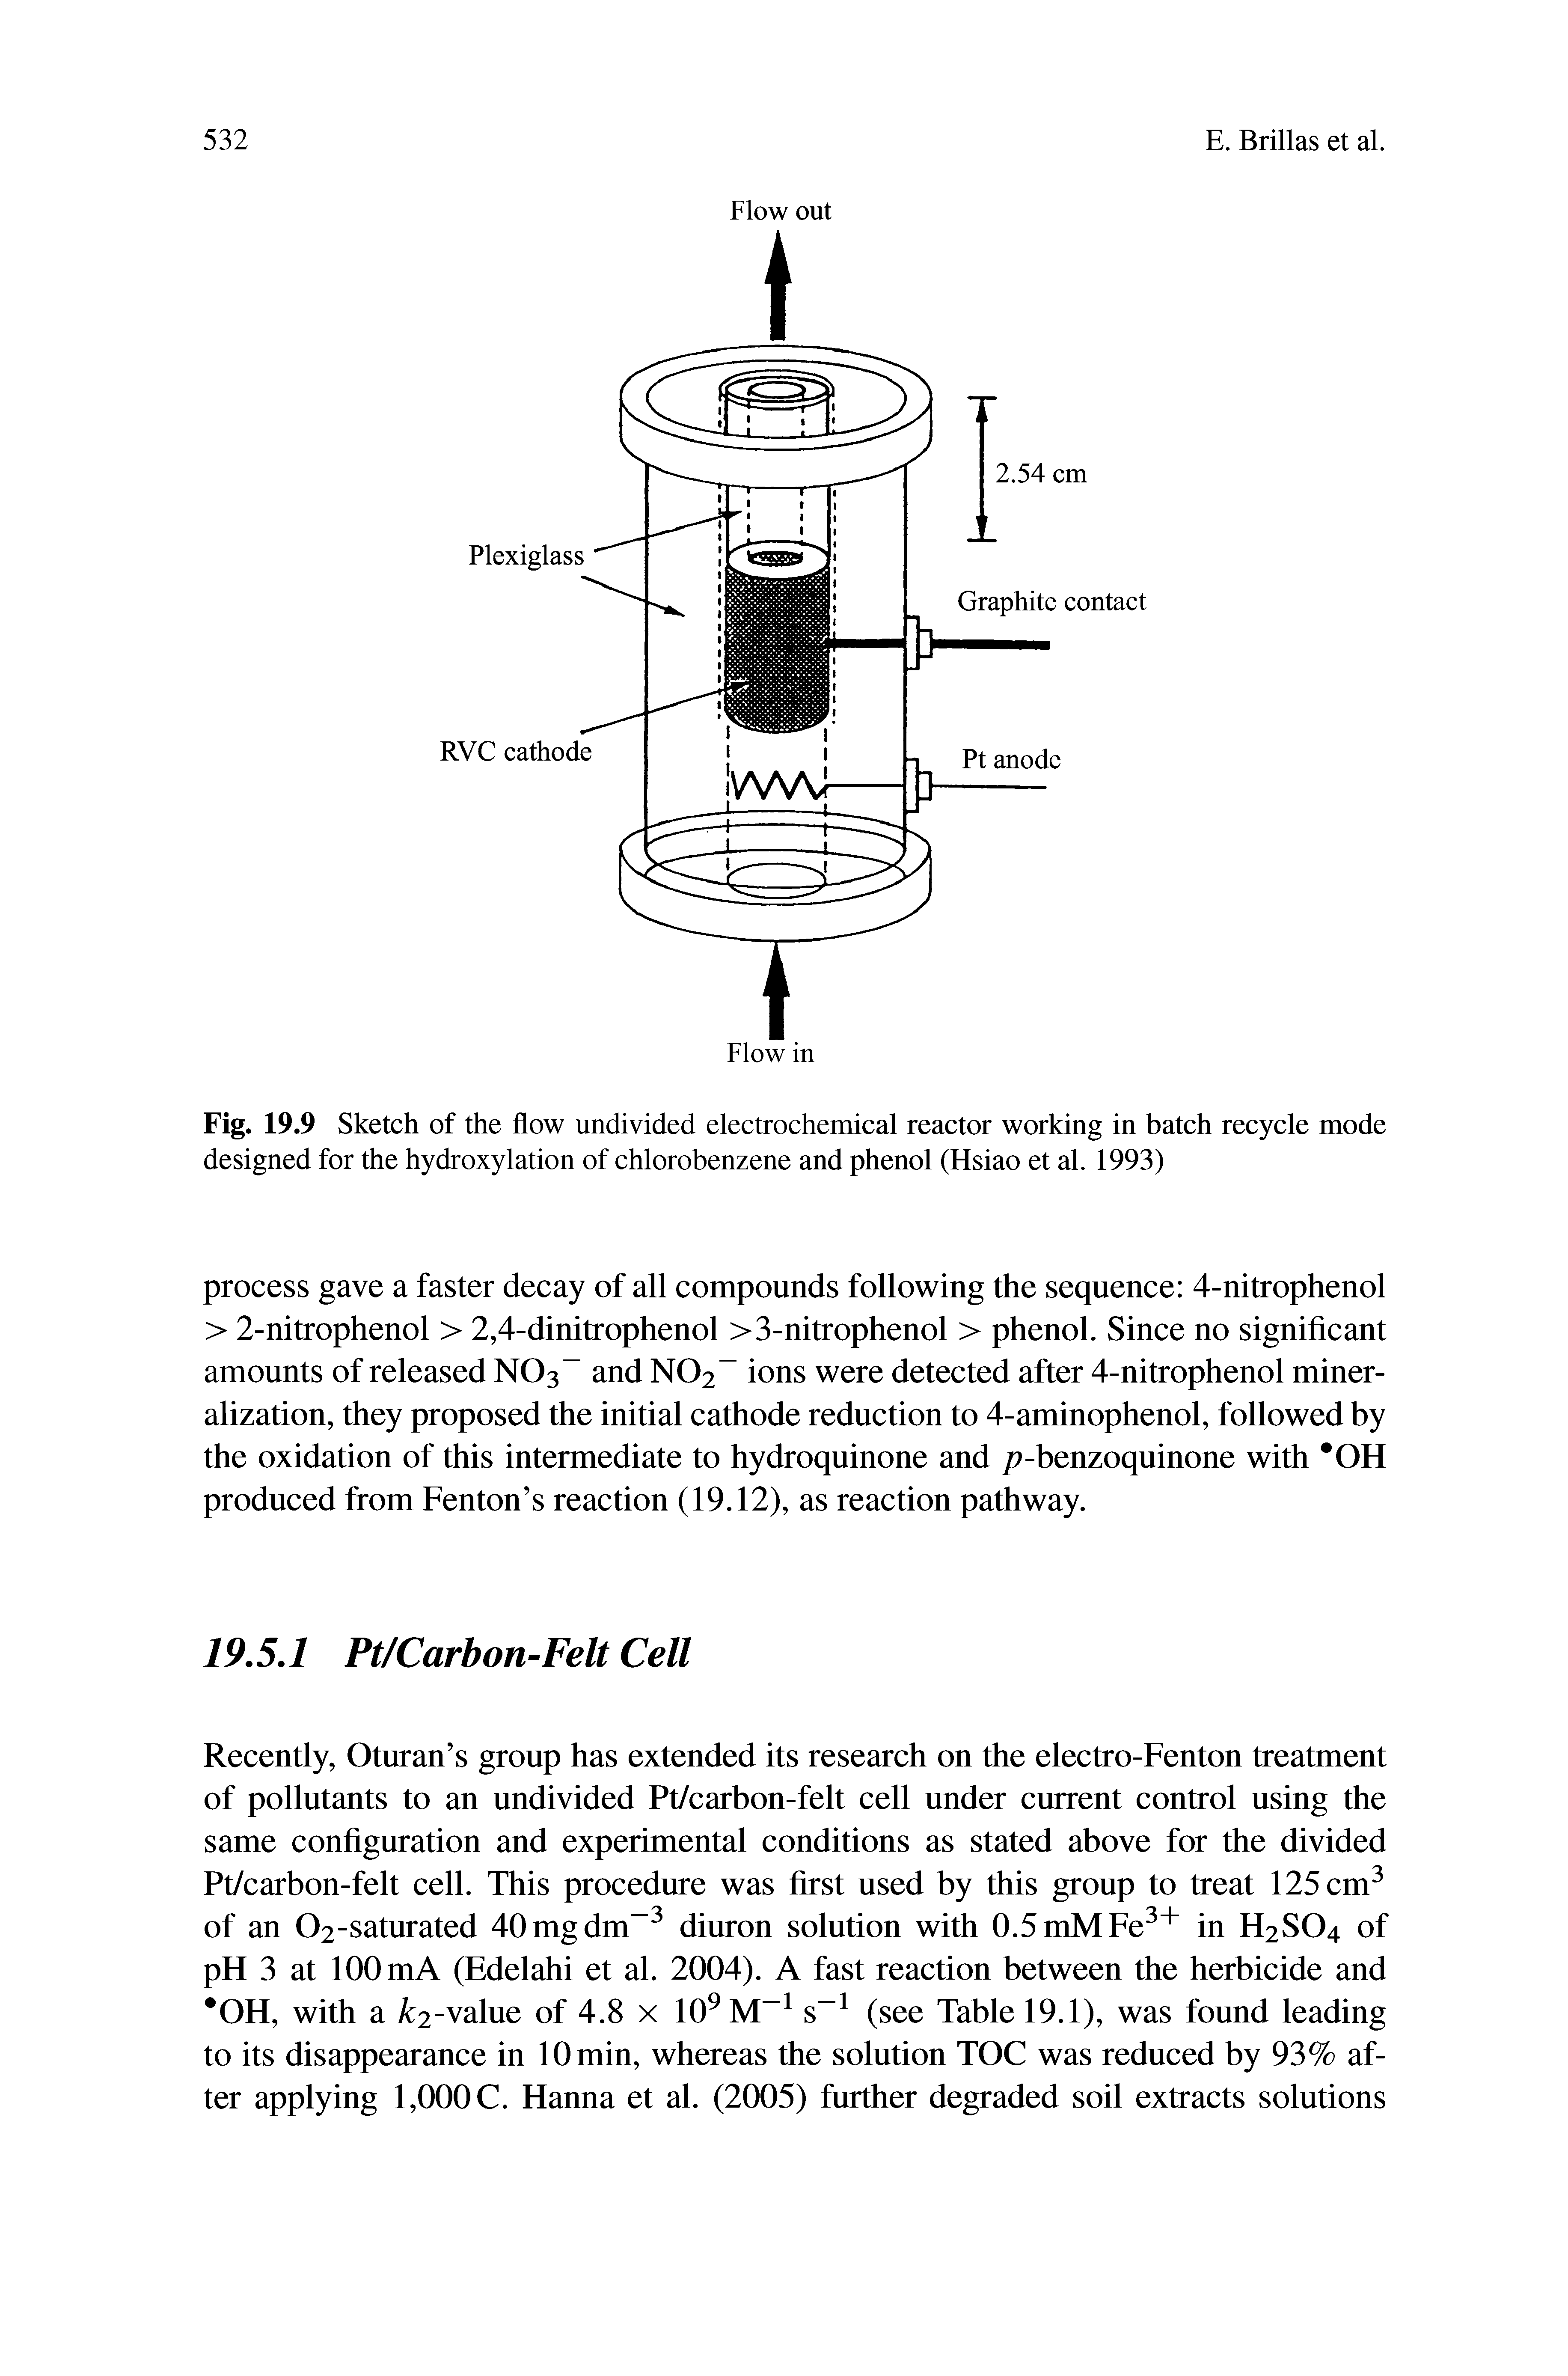 Fig. 19.9 Sketch of the flow undivided electrochemical reactor working in batch recycle mode designed for the hydroxylation of chlorobenzene and phenol (Hsiao et al. 1993)...